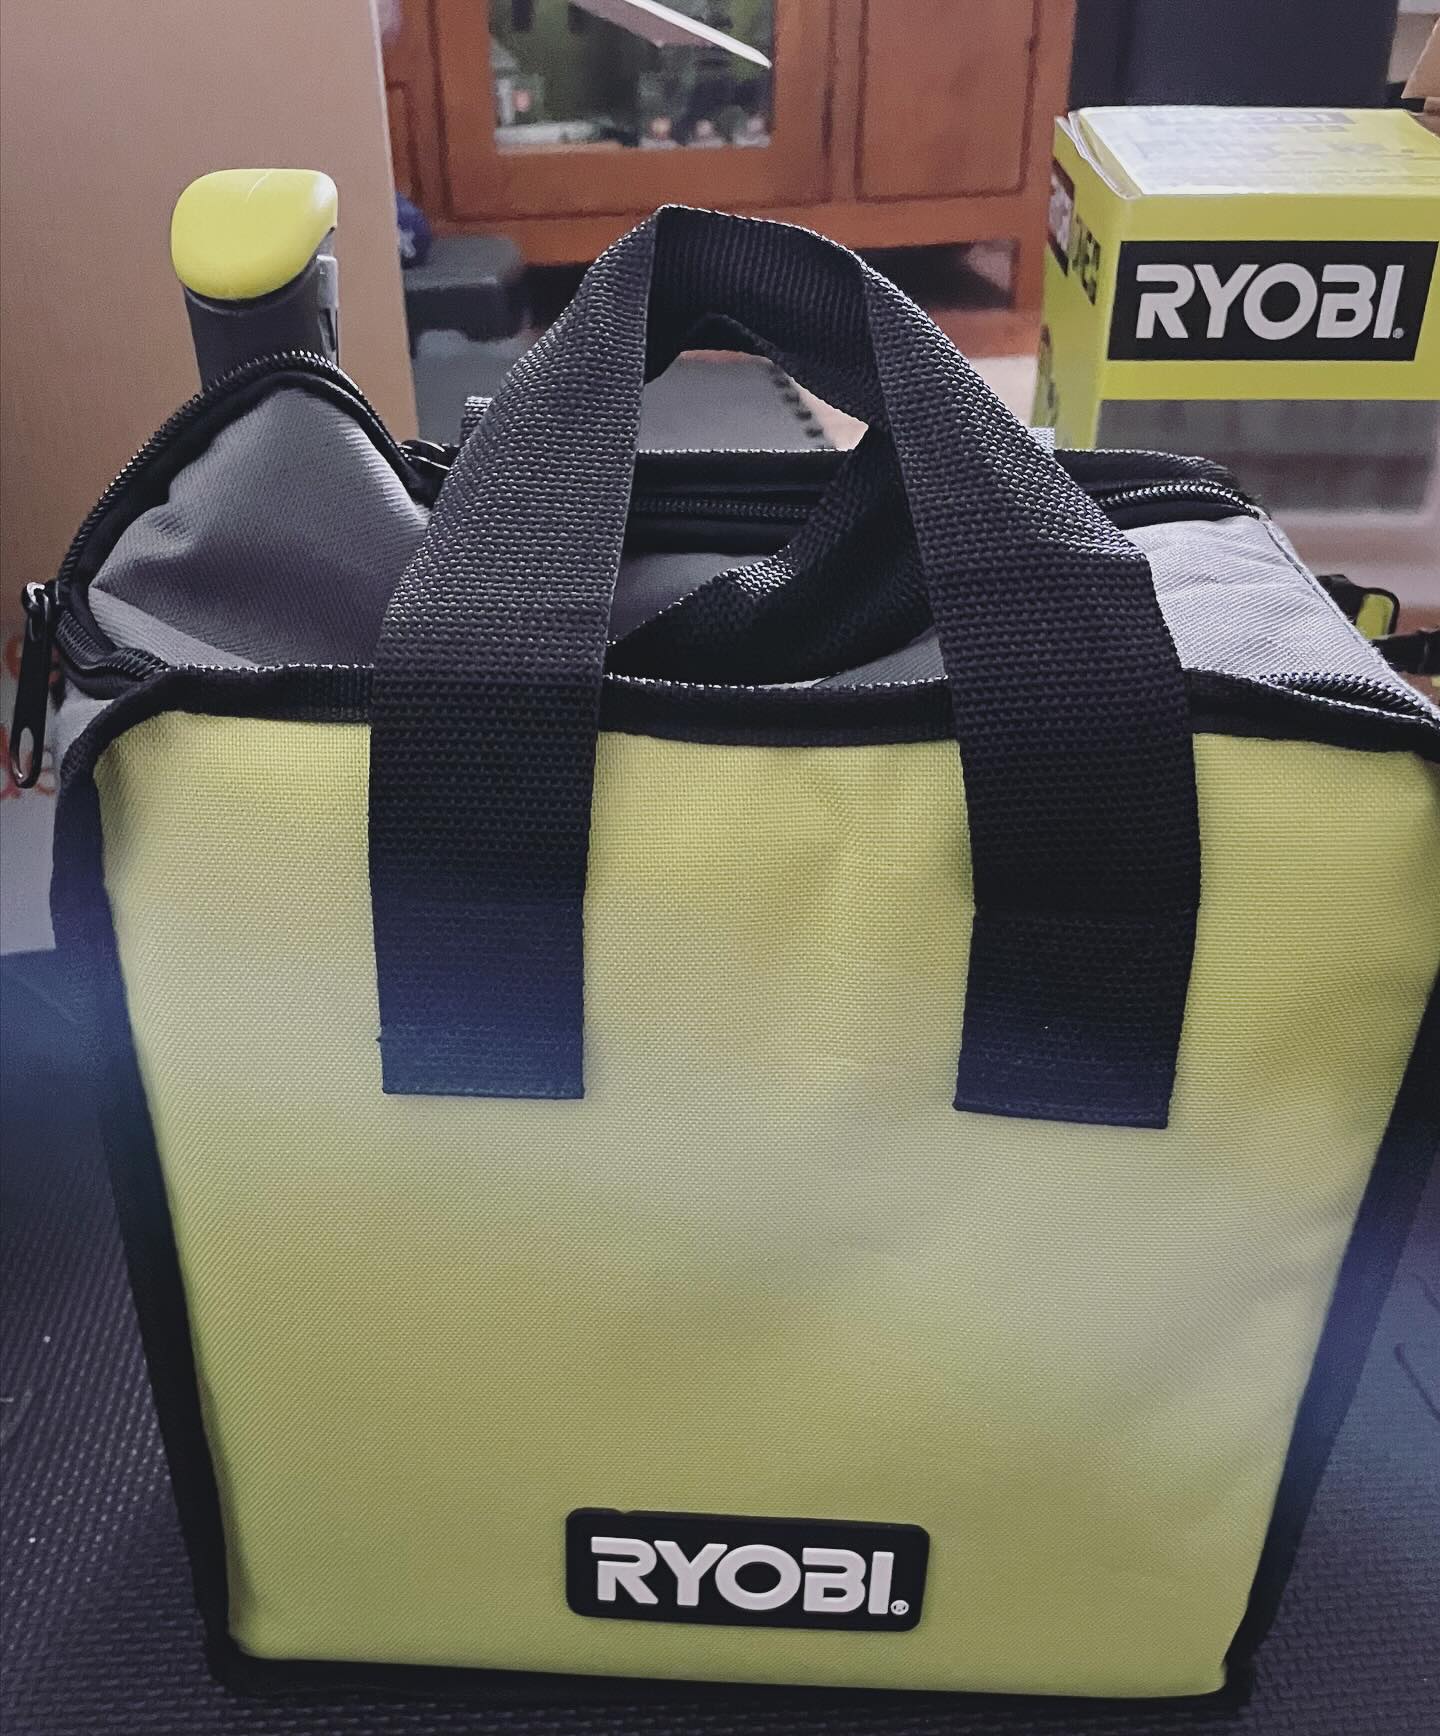 Needed to get a drill, so I can (fingers crossed) fix some stuff around the house.
bunnings supplied me with a kit of all the things, meaning I may have to give Trevor back his tools….
ryobiau #allthetools #ryobioneplus 

Only gripe is, in supplying a storage bag, you’d think it’d be set up to actually hold things nicely. 
Two things currently not in the bag are the battery and charger.
I’m just saying: if you made it so the bag was properly designed to hold all the pretty things, you wouldn’t have needed all the packaging. #somethingfortheredesign